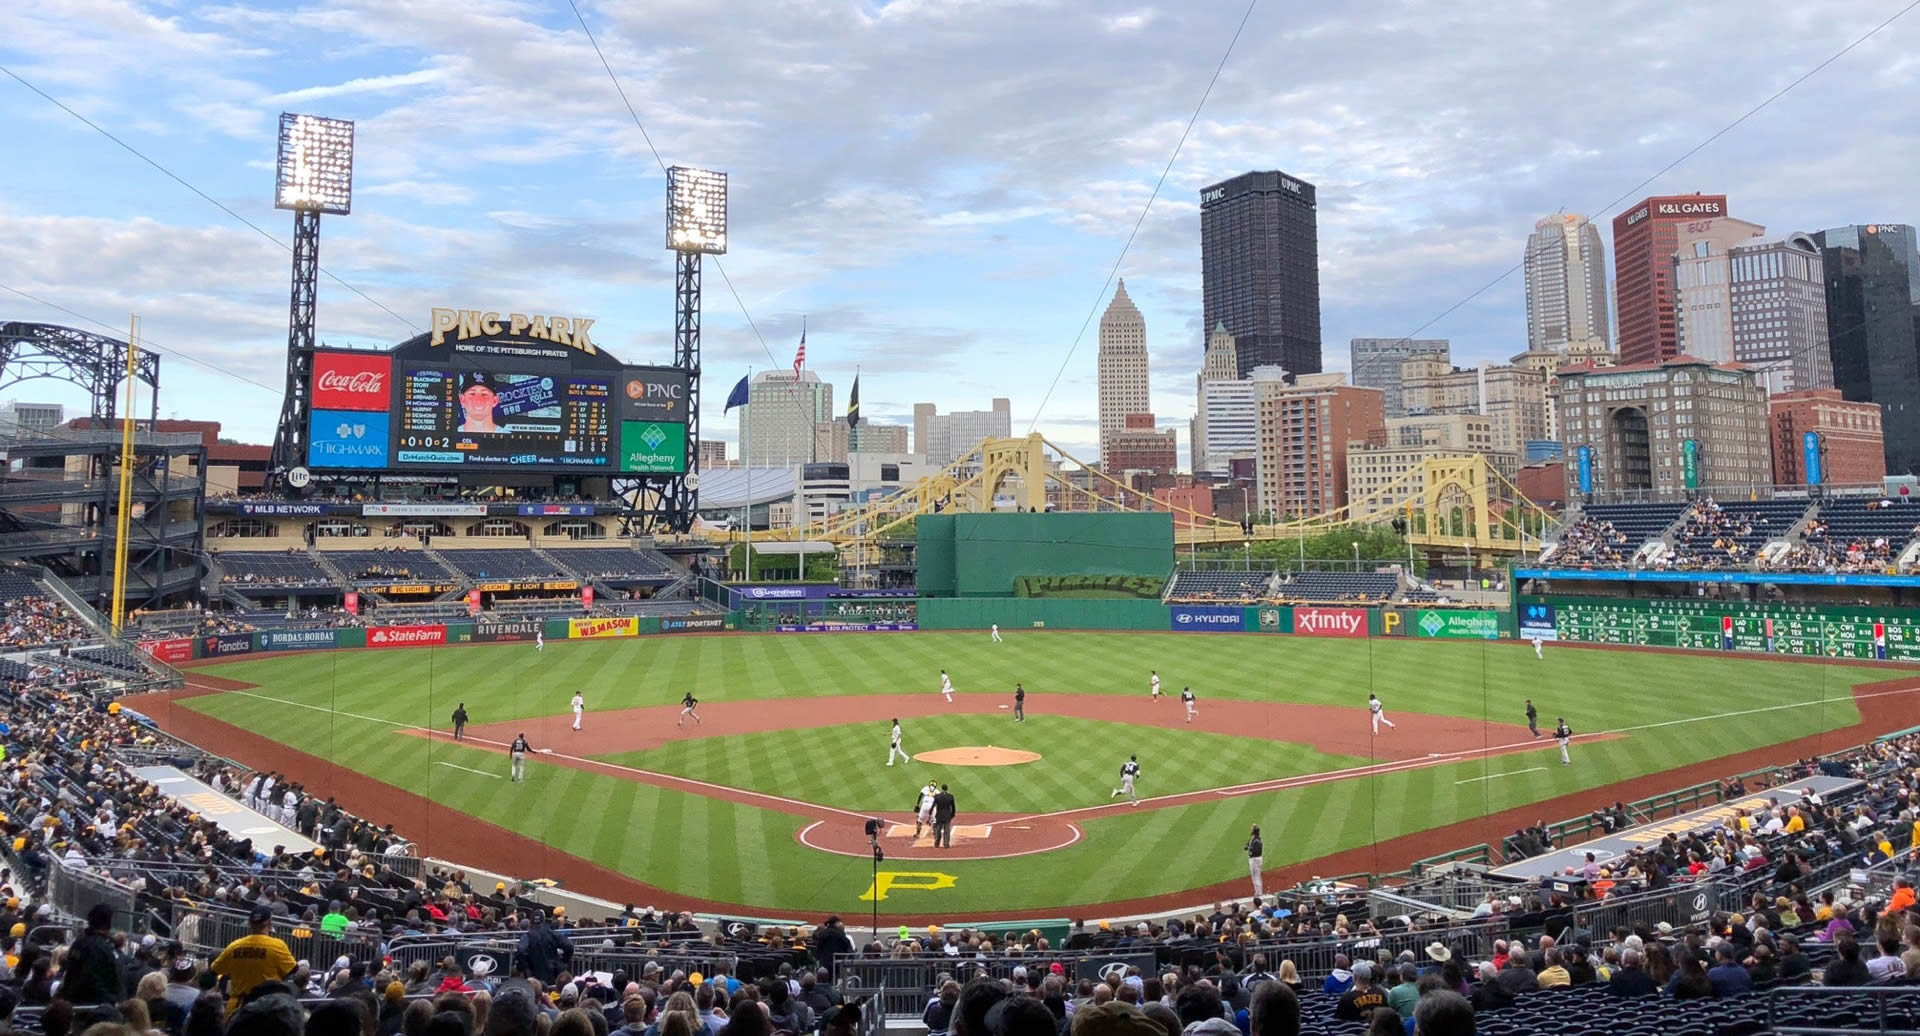 Best Seats for Pittsburgh Pirates at PNC Park